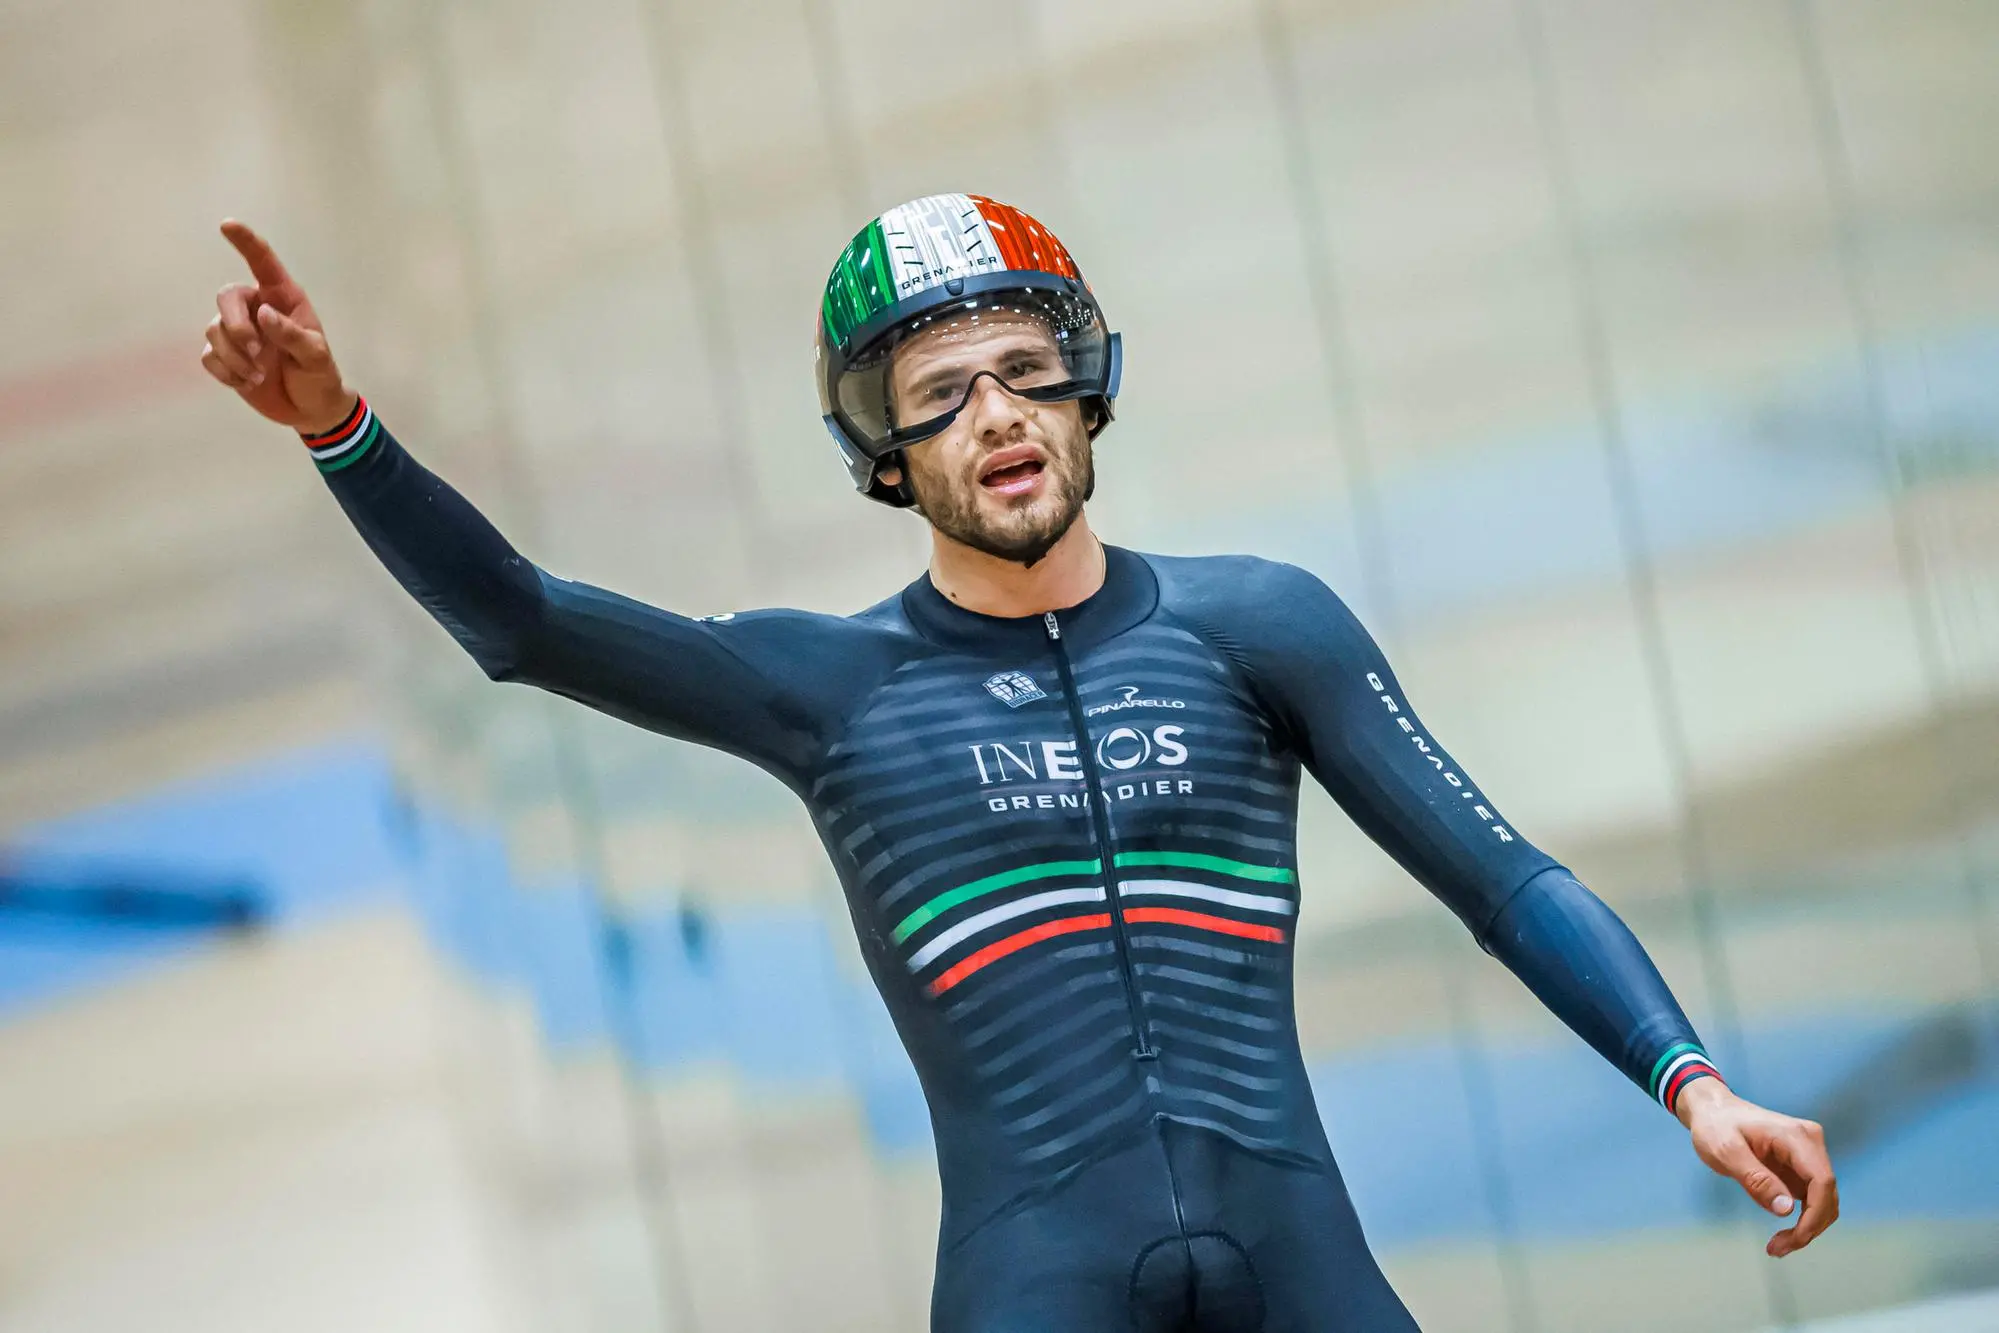 Ineos Grenadiers' Italian rider Filippo Ganna celebrates after breaking the hour record with a distance of 56.792km in the Velodrome Suisse, an indoor velodrome in Grenchen, northern Switzerland on October 8, 2022. (Photo by Valentin FLAURAUD / AFP)